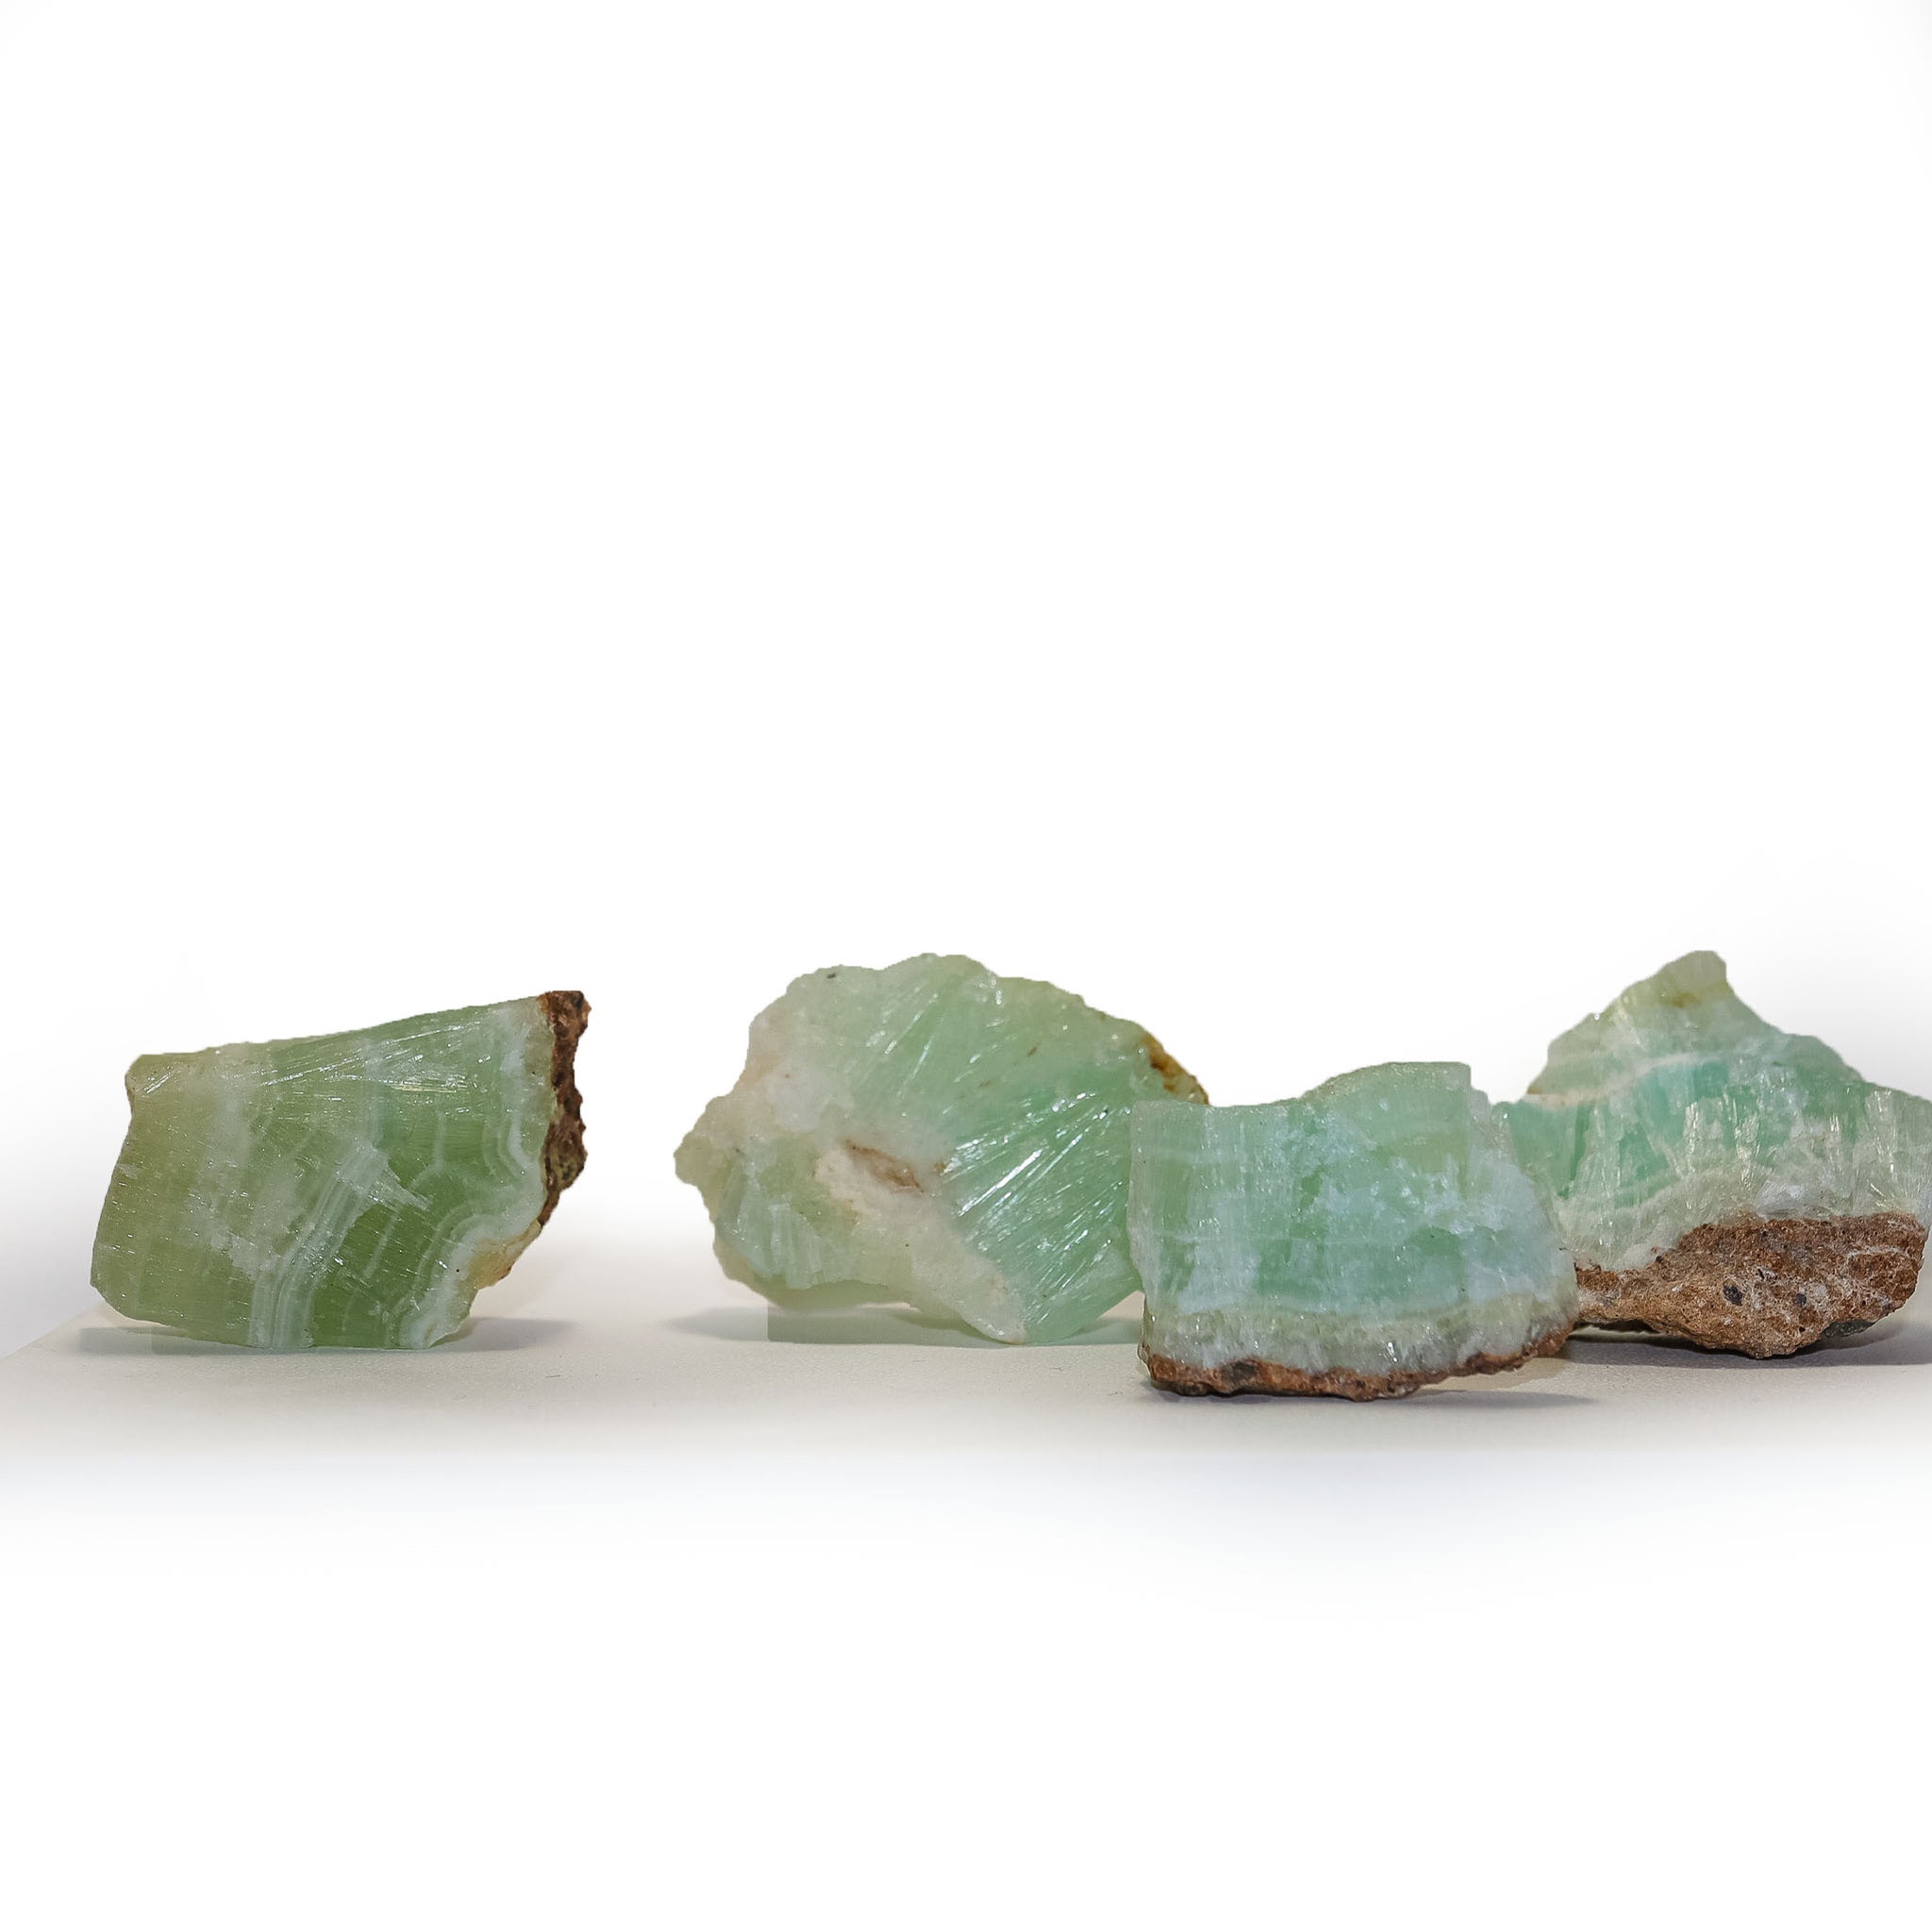 Raw Caribbean Calcite Stone for Joy and Relaxation